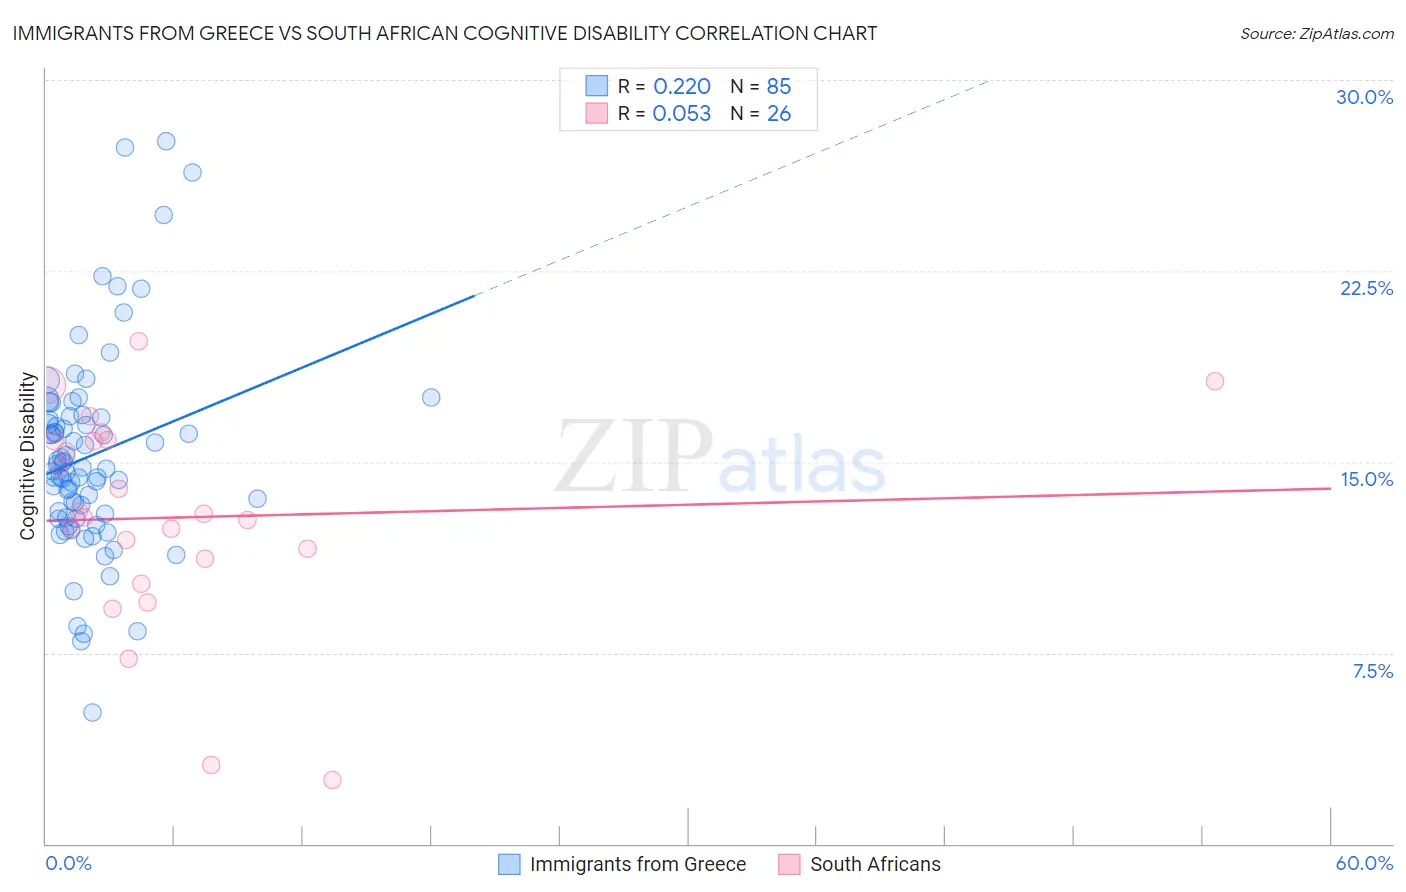 Immigrants from Greece vs South African Cognitive Disability